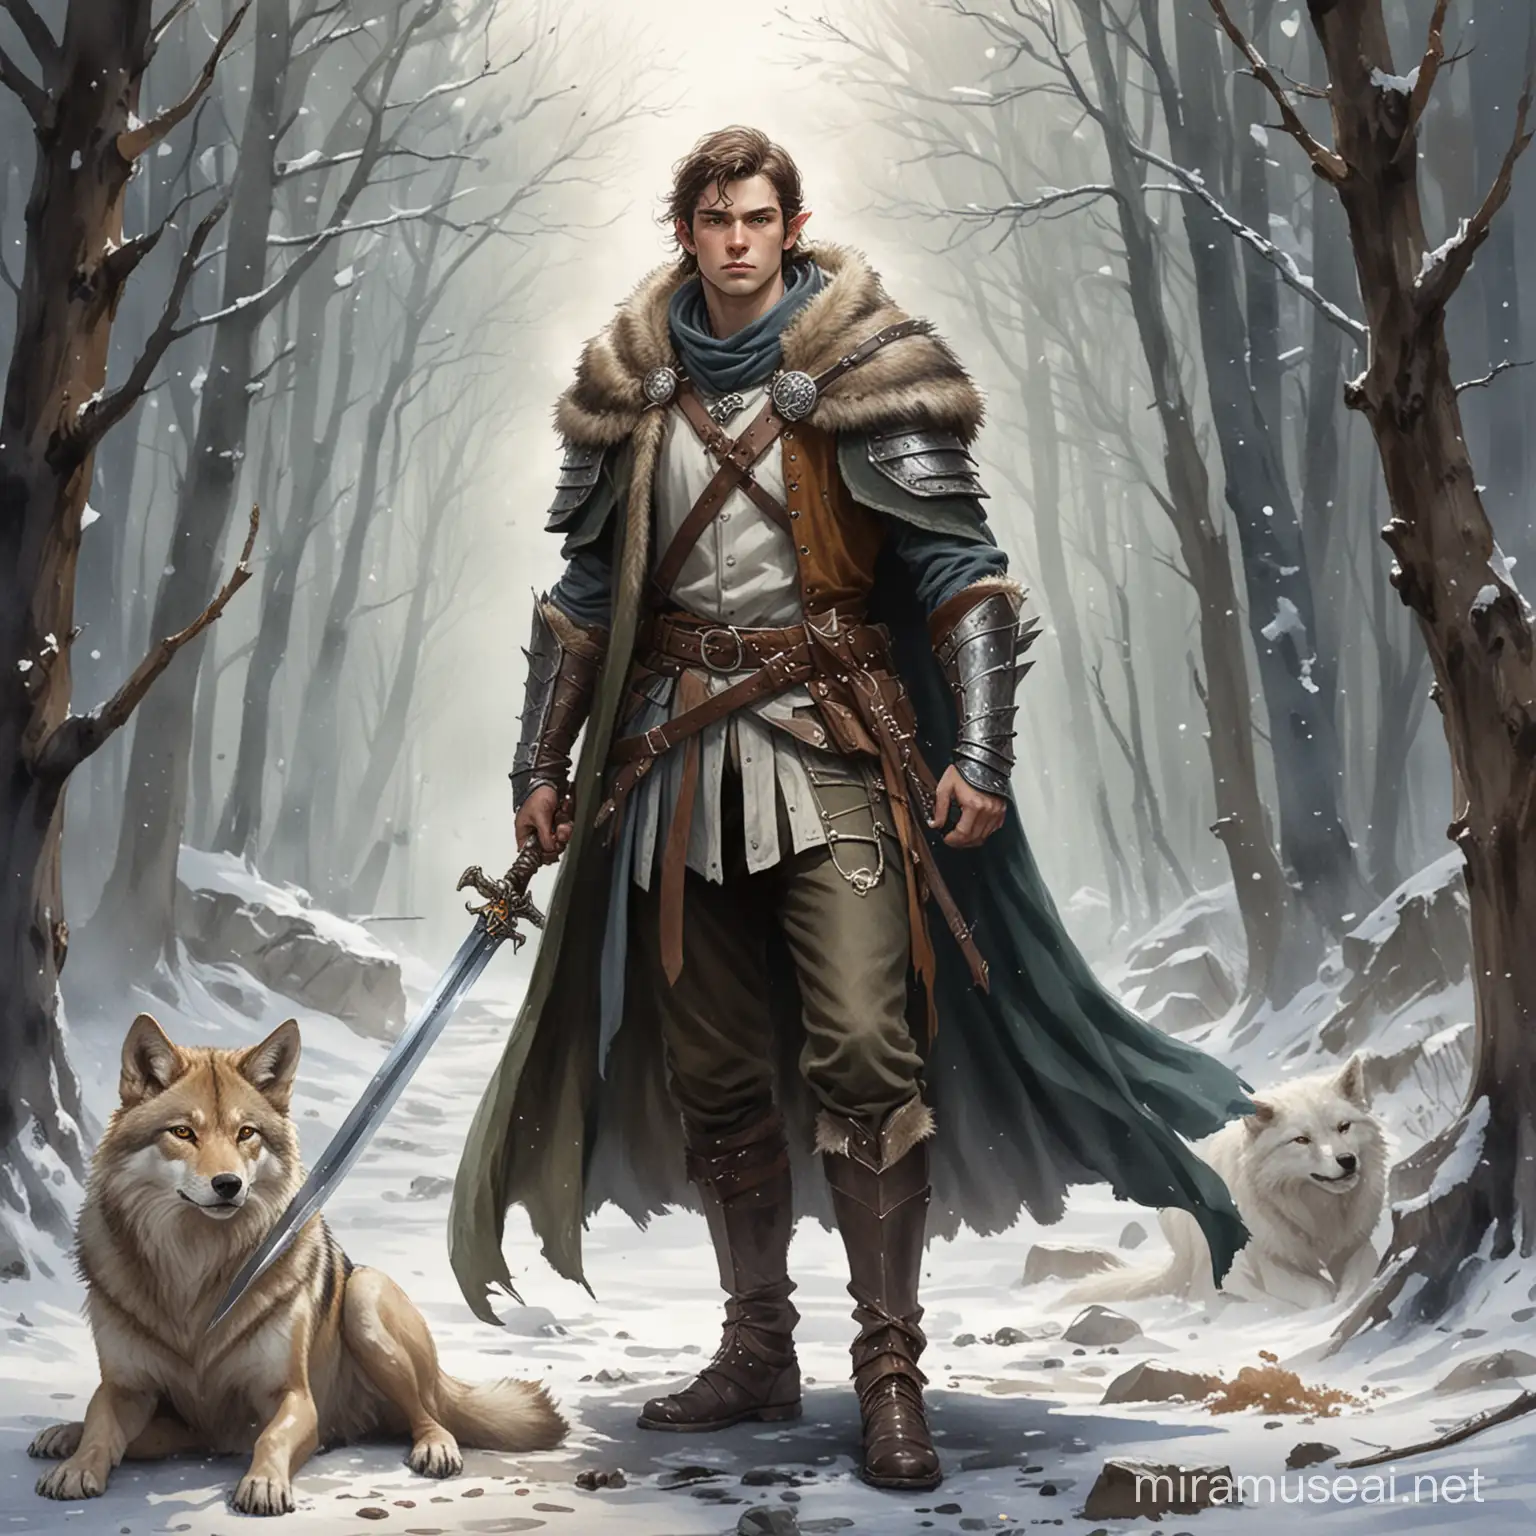 watercolor style: young male half elf battlesmith, wearing fur cloak, longsword, wolf companion with metal chest/leg